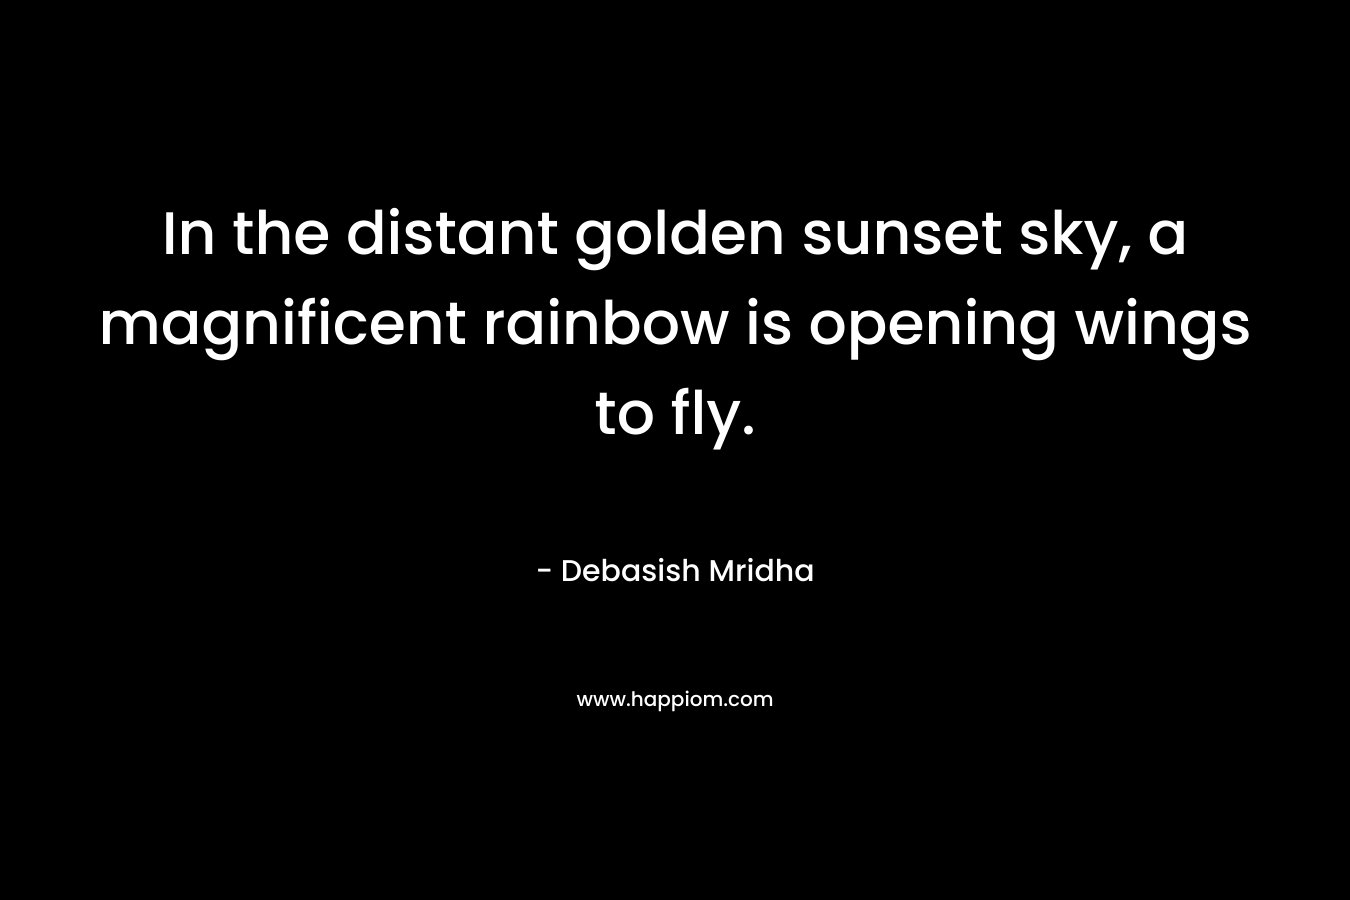 In the distant golden sunset sky, a magnificent rainbow is opening wings to fly.